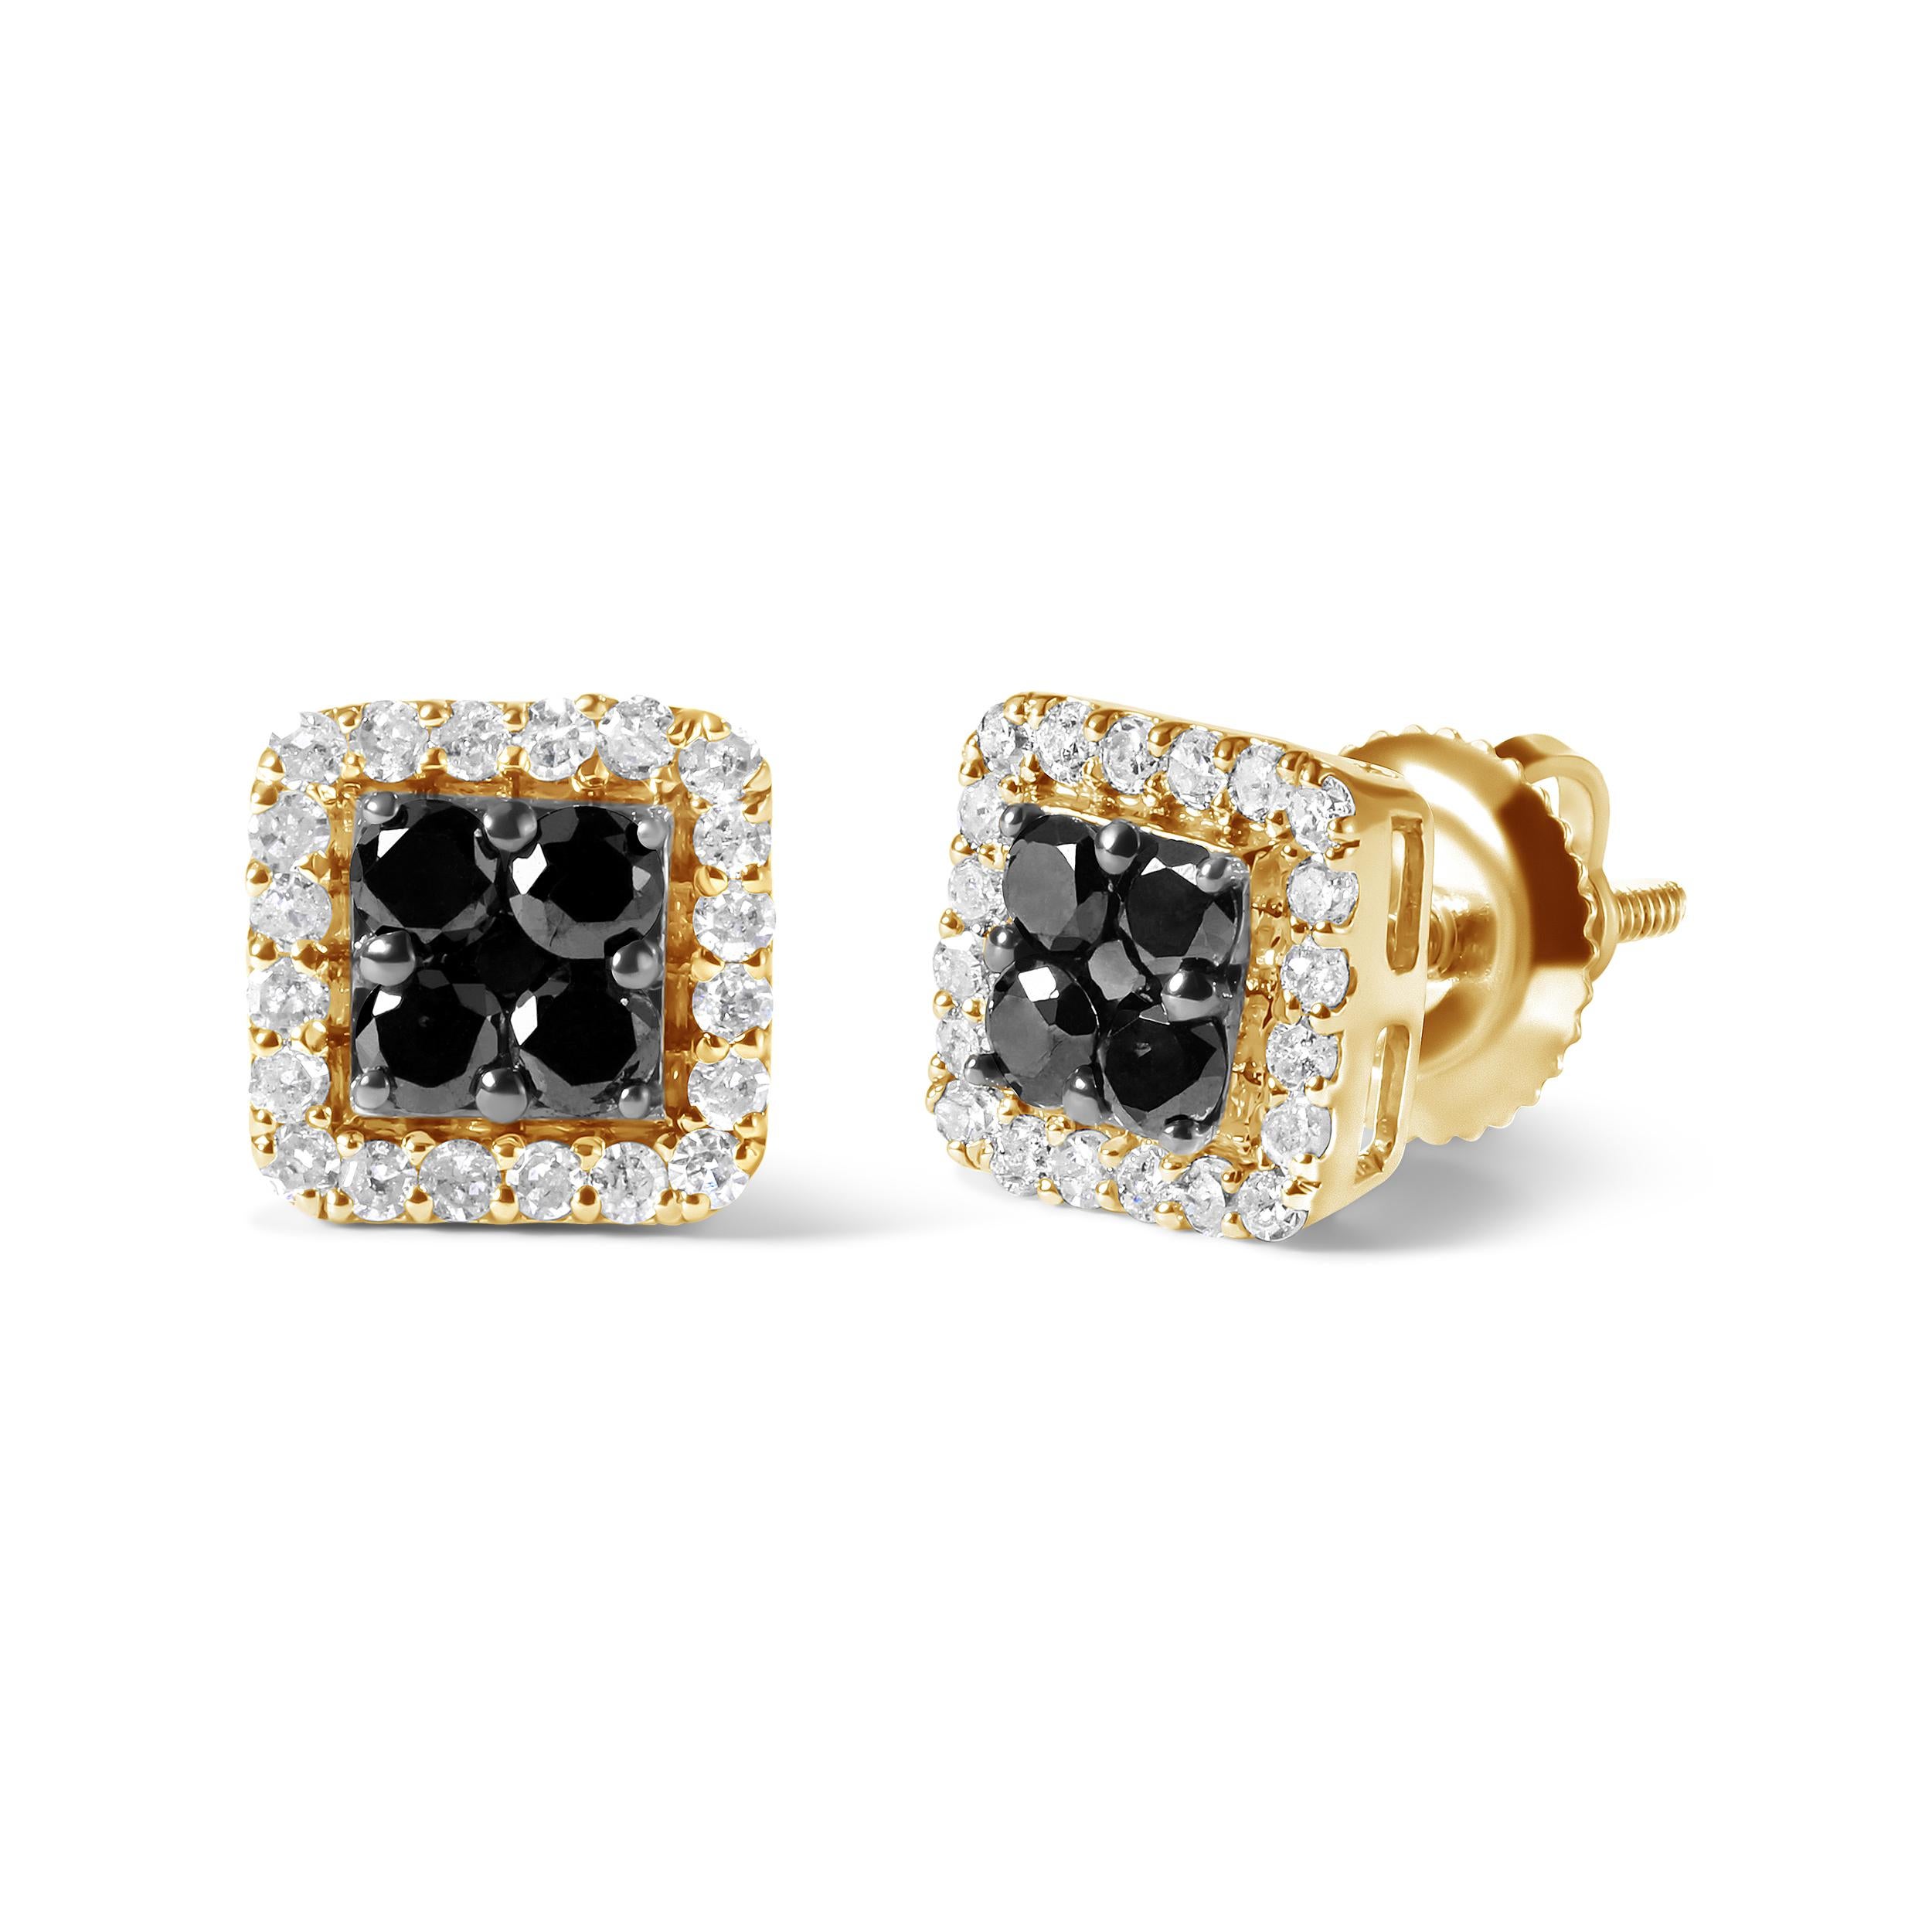 Elevate your style with these stunning composite halo stud earrings, crafted from 10K yellow gold. The sophisticated design features a mesmerizing mix of 50 natural round diamonds, including 10 black diamonds treated for color and 40 white diamonds